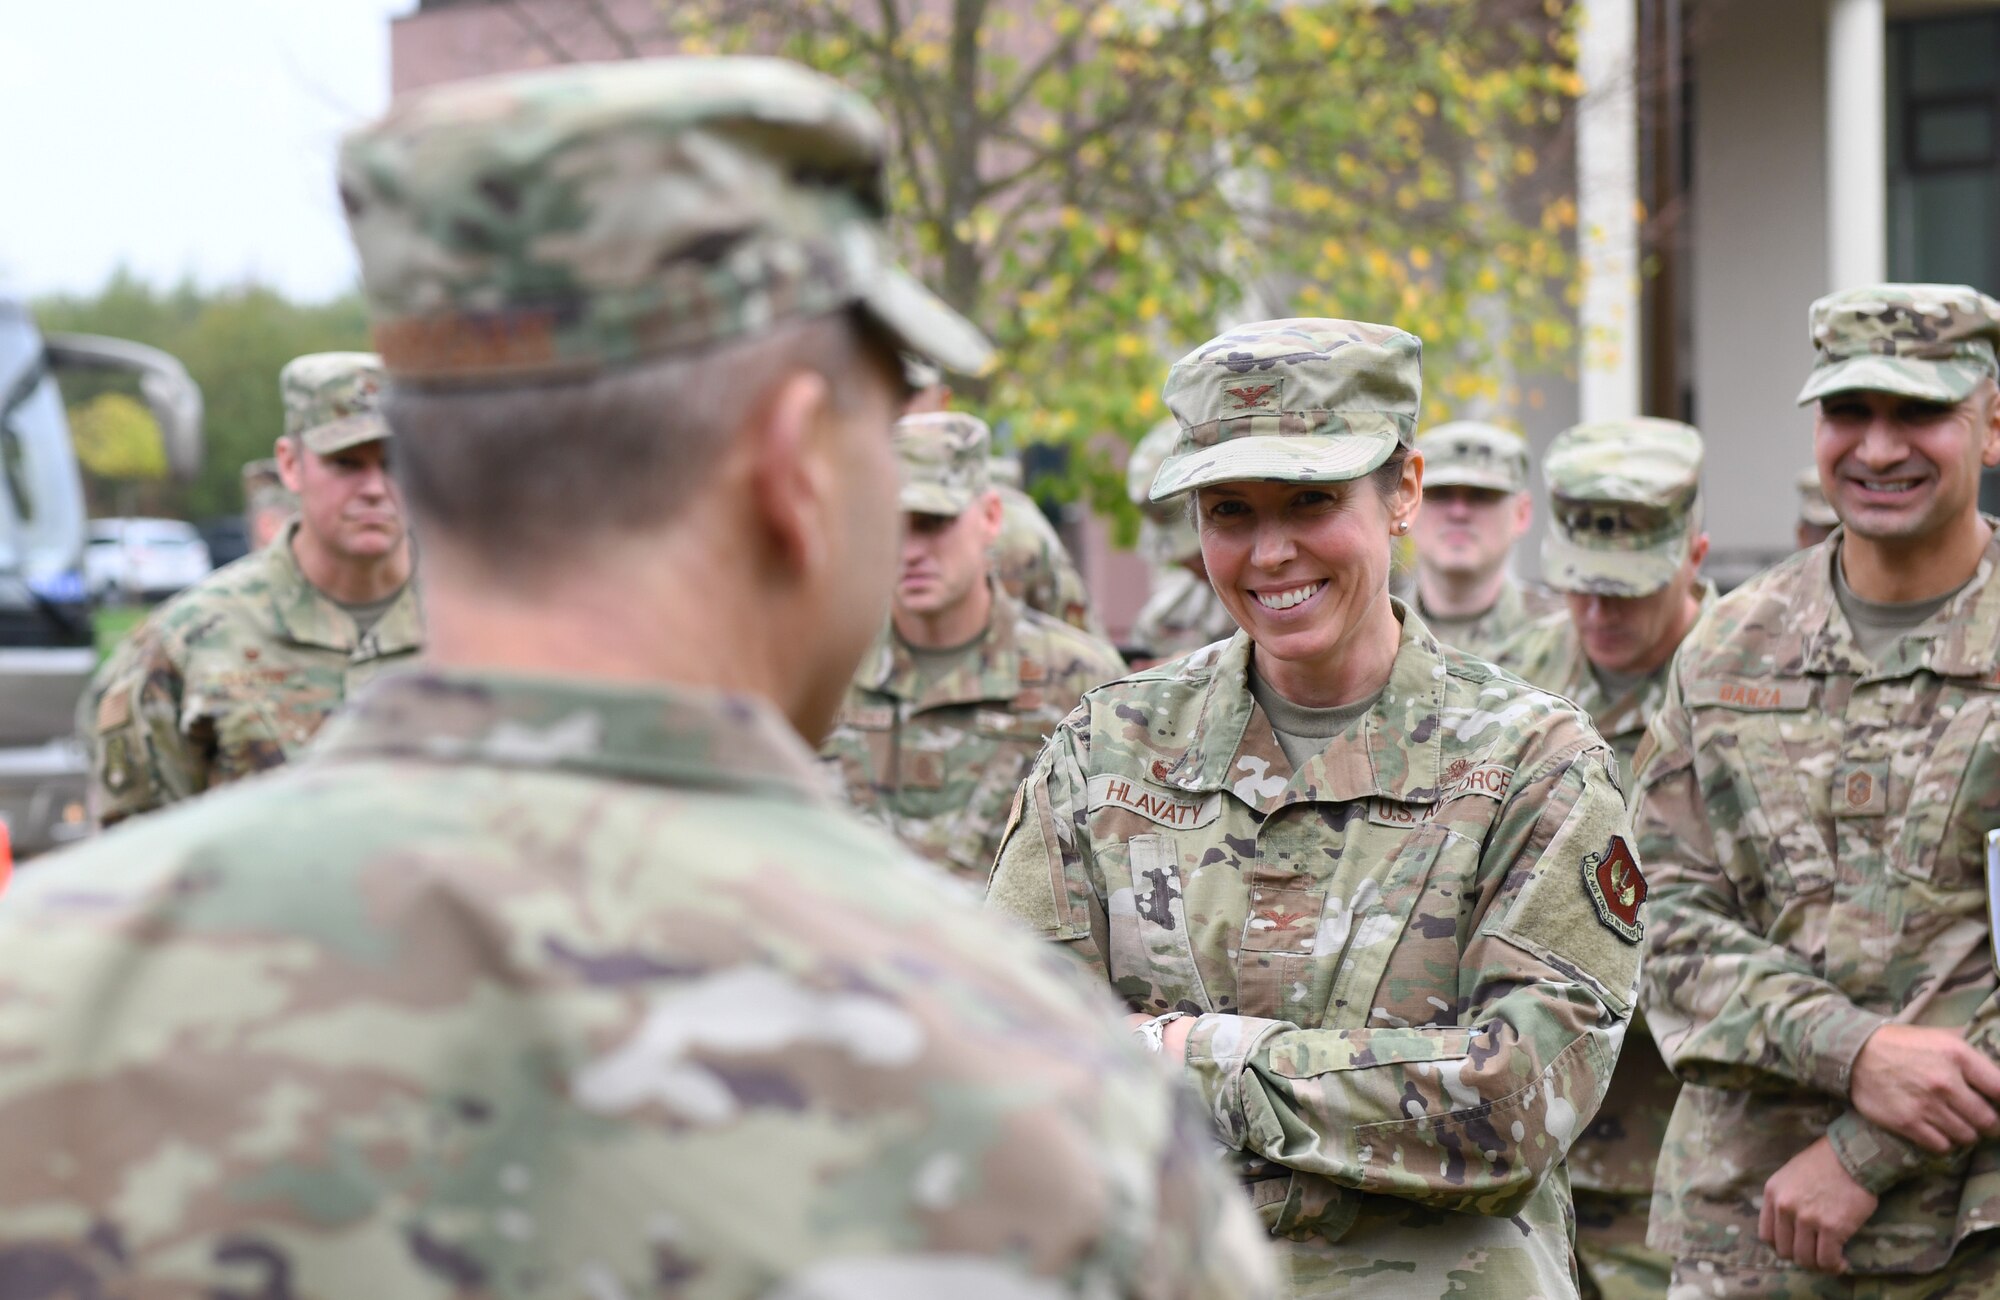 U.S. Air Force Gen. Jeff Harrigian, U.S. Air Forces Europe and Air Forces Africa commander, talks to members of the 435th Air Ground Operations Wing during an immersion tour at Ramstein Air Base, Germany, Oct. 23, 2019. During the tour, Harrigian learned about Airmen’s innovations and challenges as well as current operations from experts across the 435th AGOW and the 435th Air Expeditionary Wing. (U.S. Air Force photo by Staff Sgt. Alex Fox Echols III)